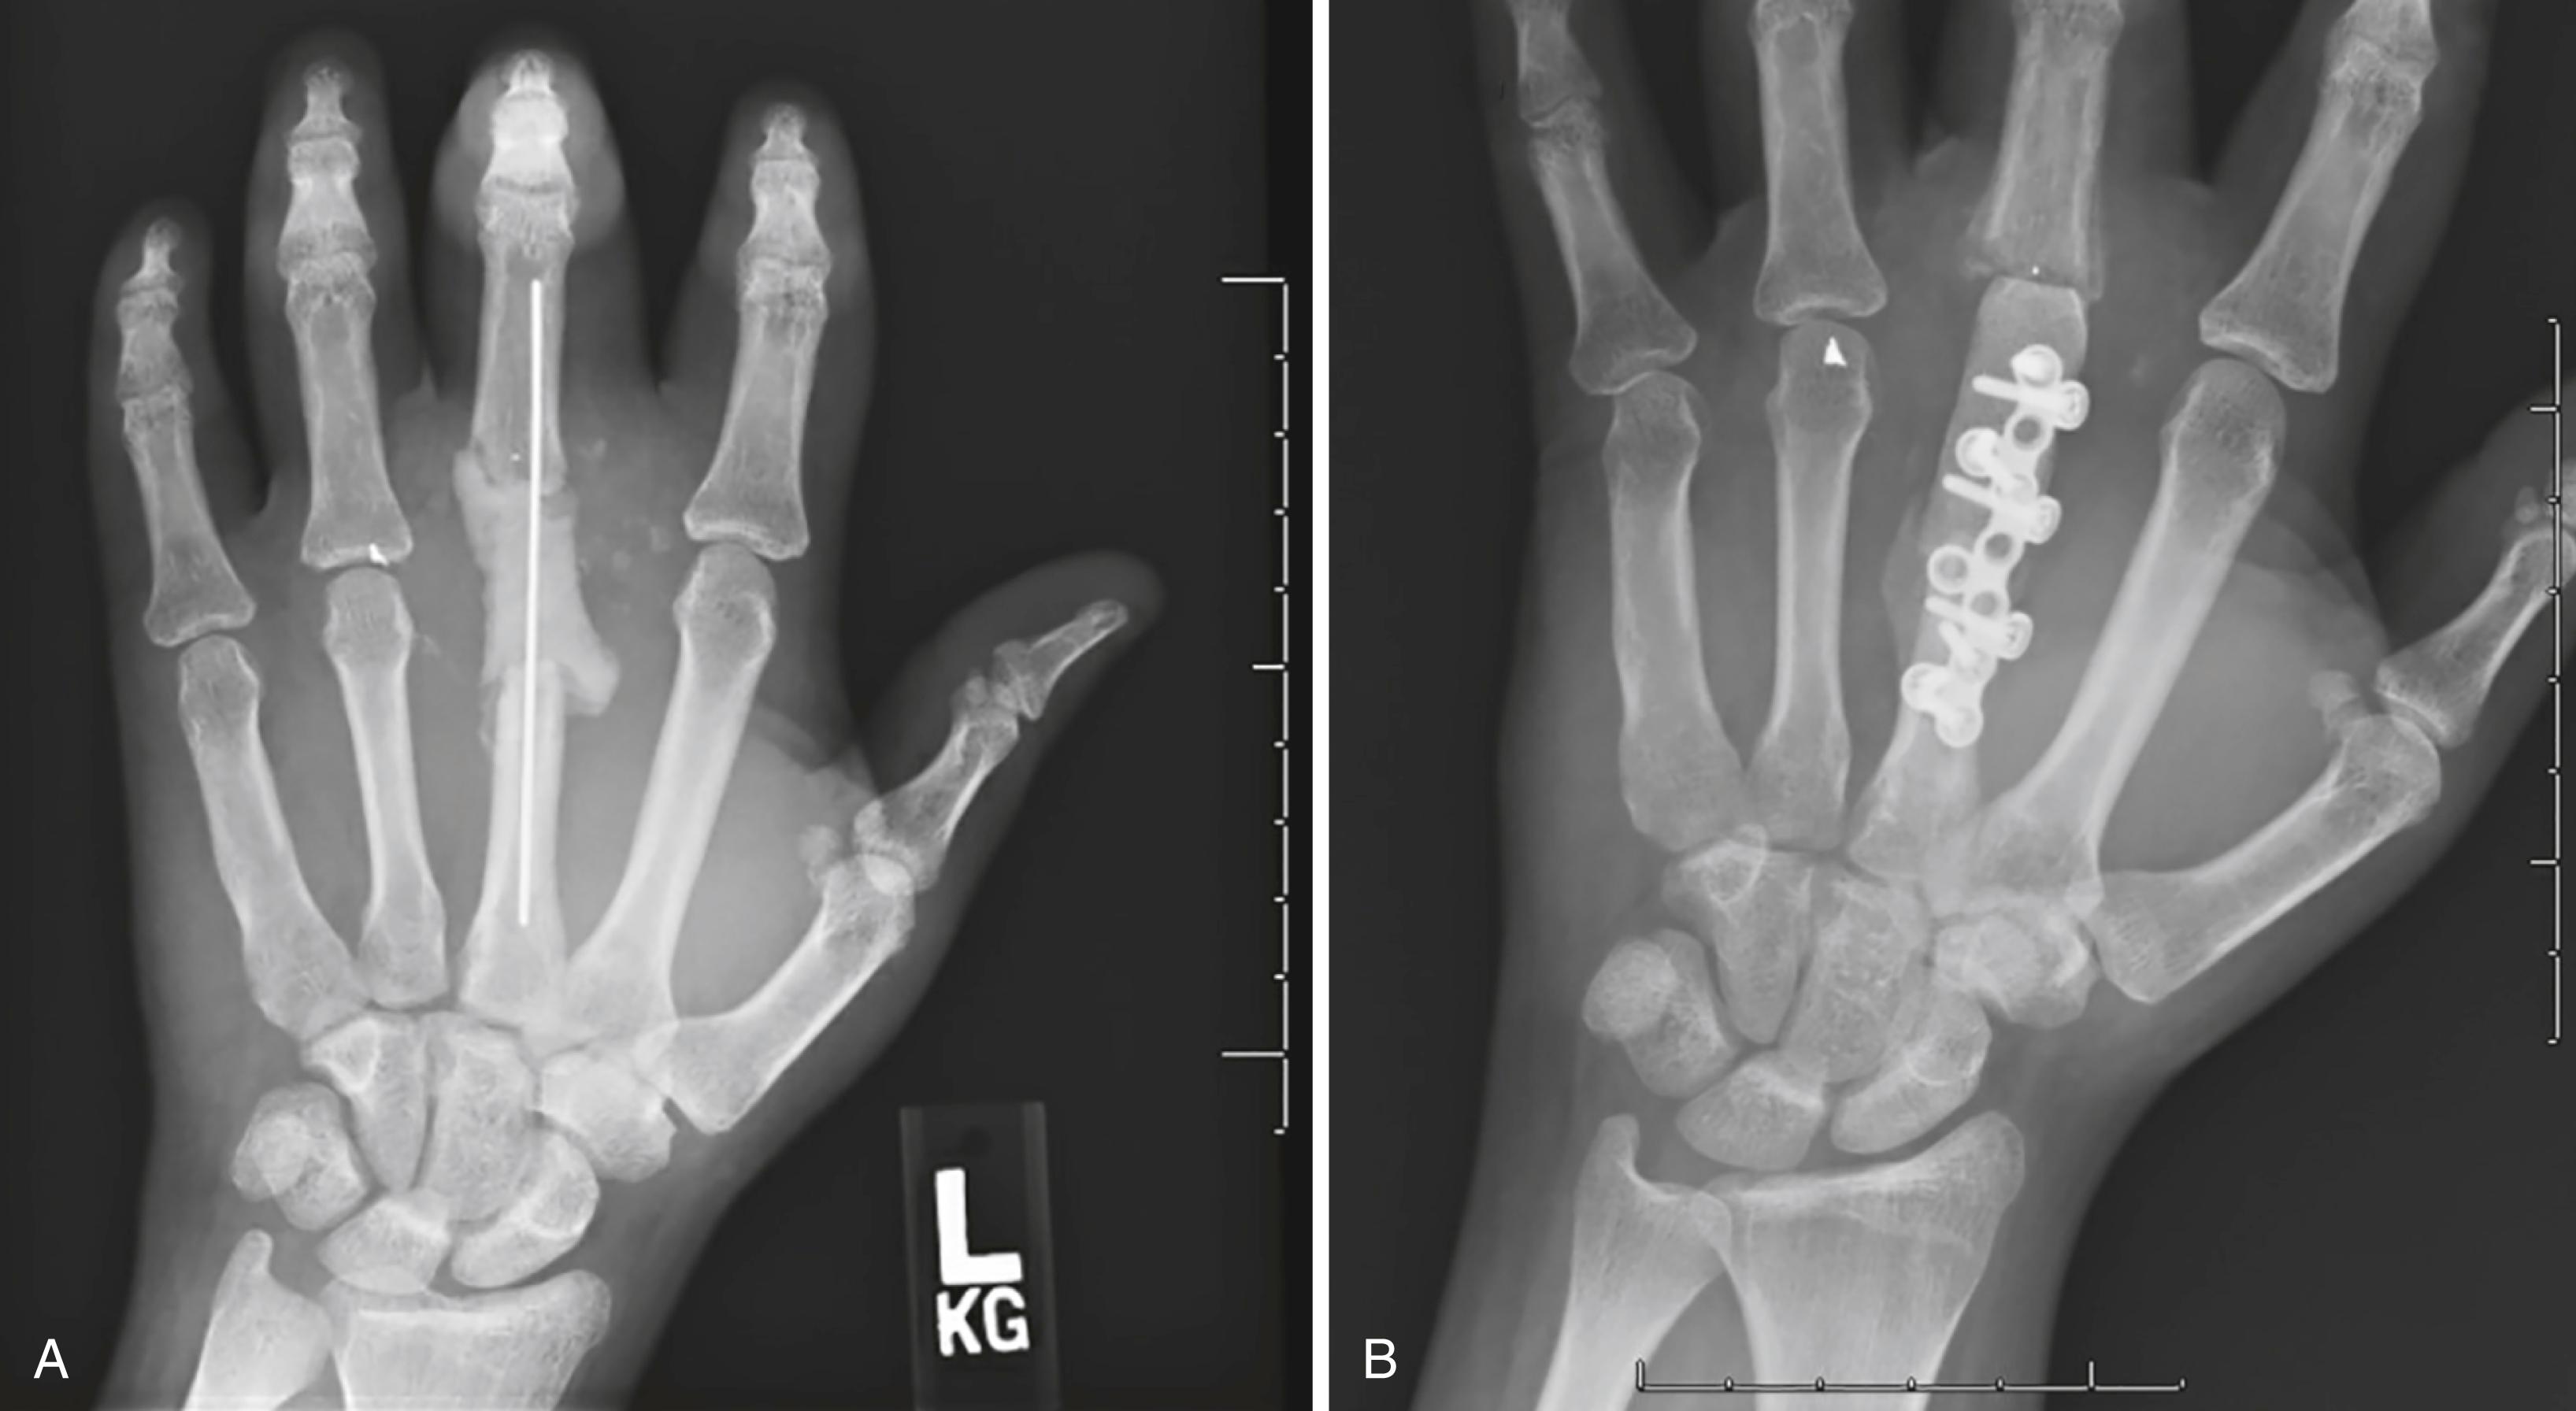 Fig. 7.2, A, A comminuted metacarpal head fracture from a gunshot wound temporized with an antibiotic spacer and maintaining volar plate distally. B, Spacer removed and an iliac crest bone graft placed with interposed volar plate distally to allow ultimately a 50-degree arc of painless motion.